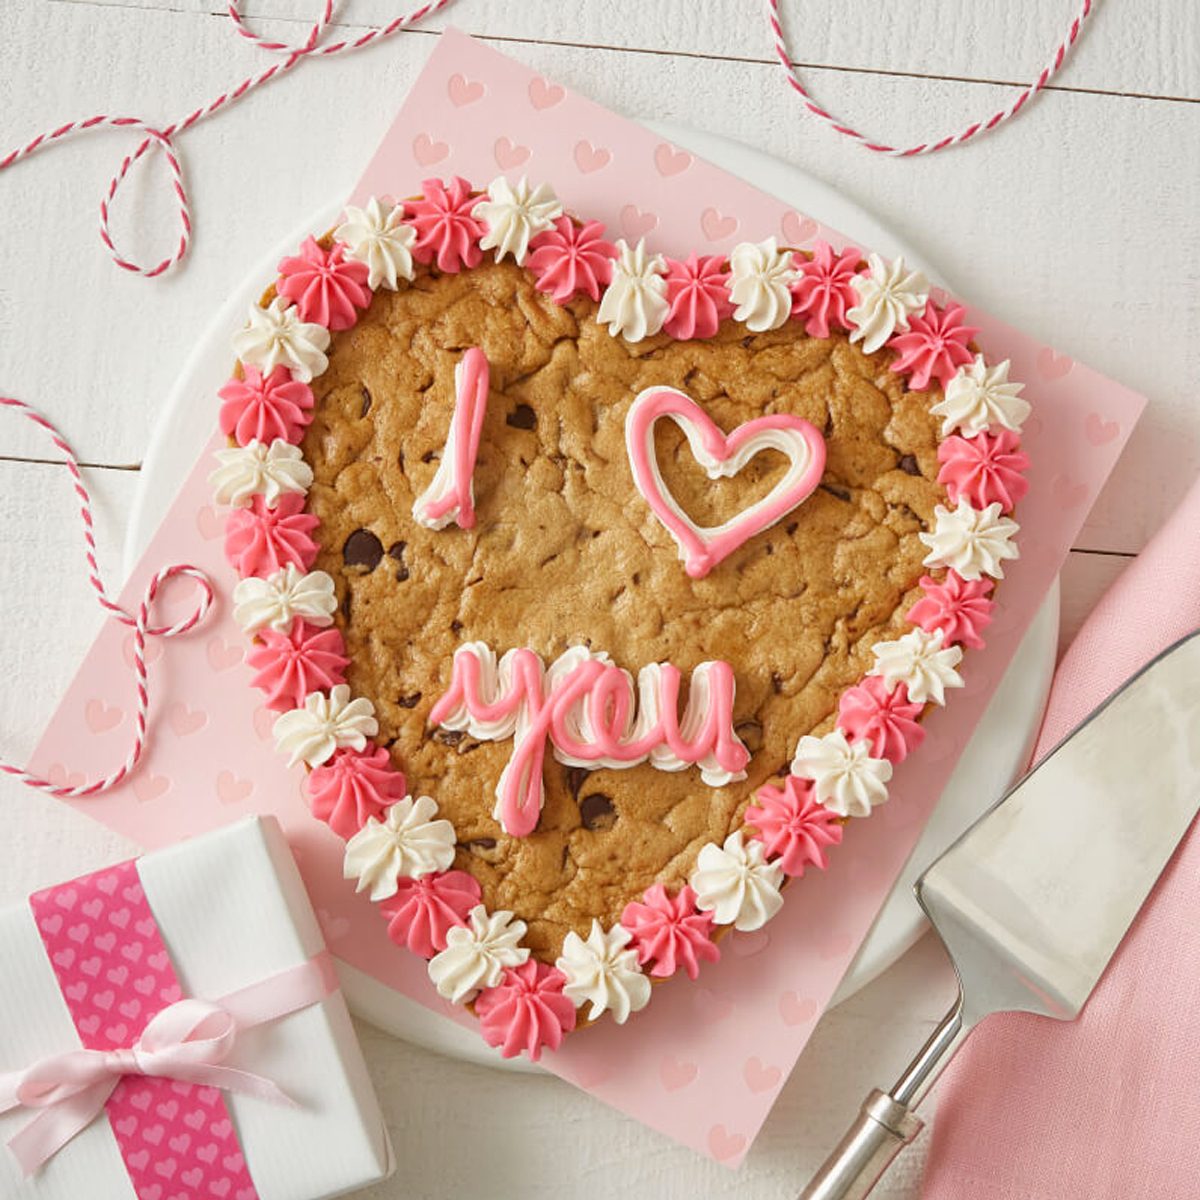 https://www.tasteofhome.com/wp-content/uploads/2022/01/9-I-LOVE-YOU-COOKIE-CAKE-ecomm-mrsfields.jpg?fit=700%2C700